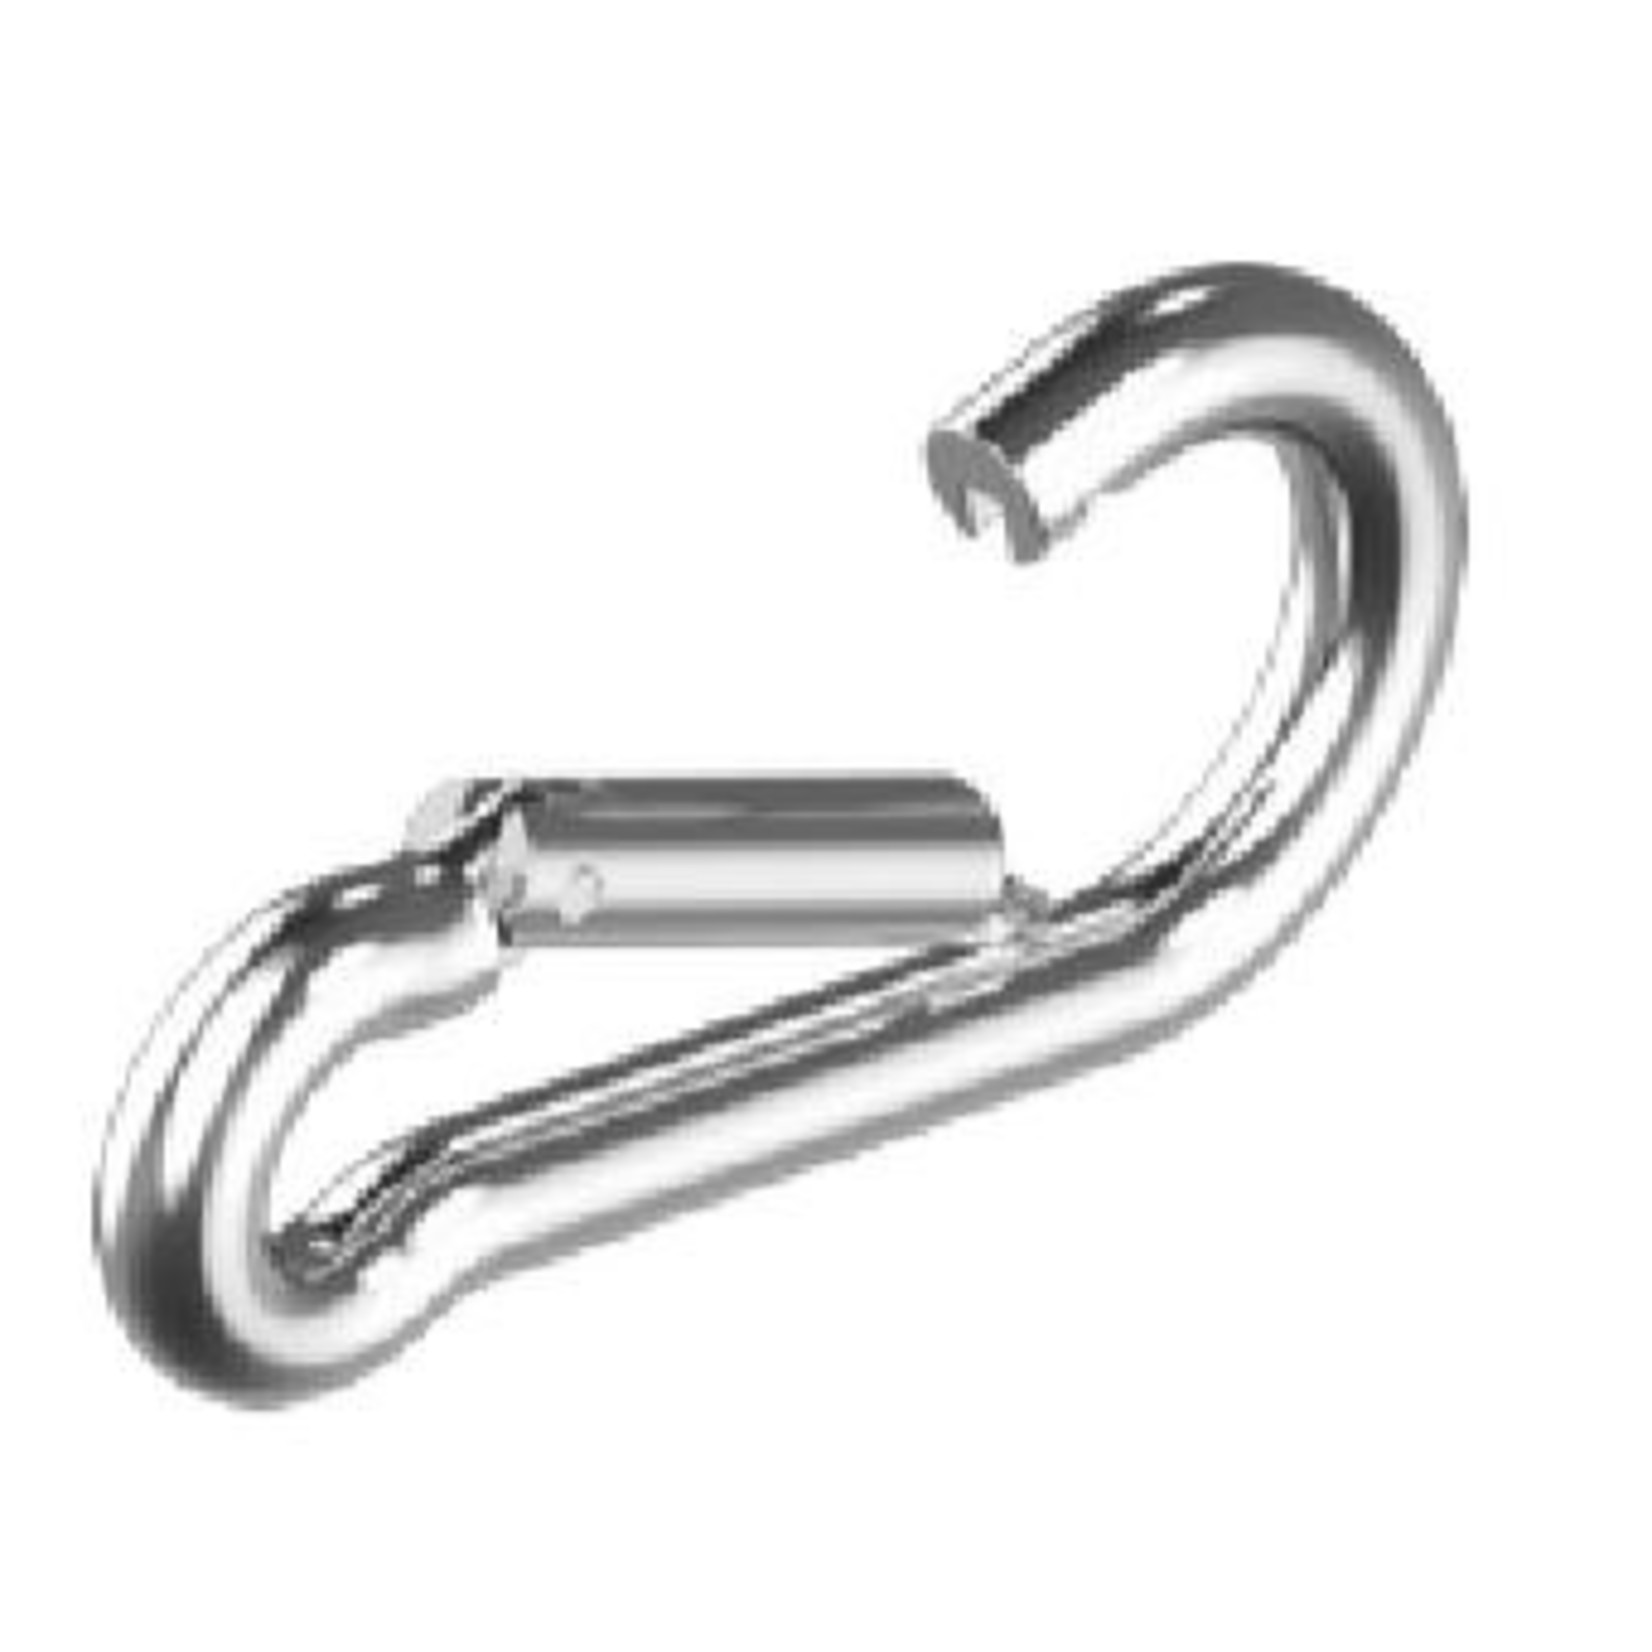 Snap hook stainless 11x120mm 10 pcs